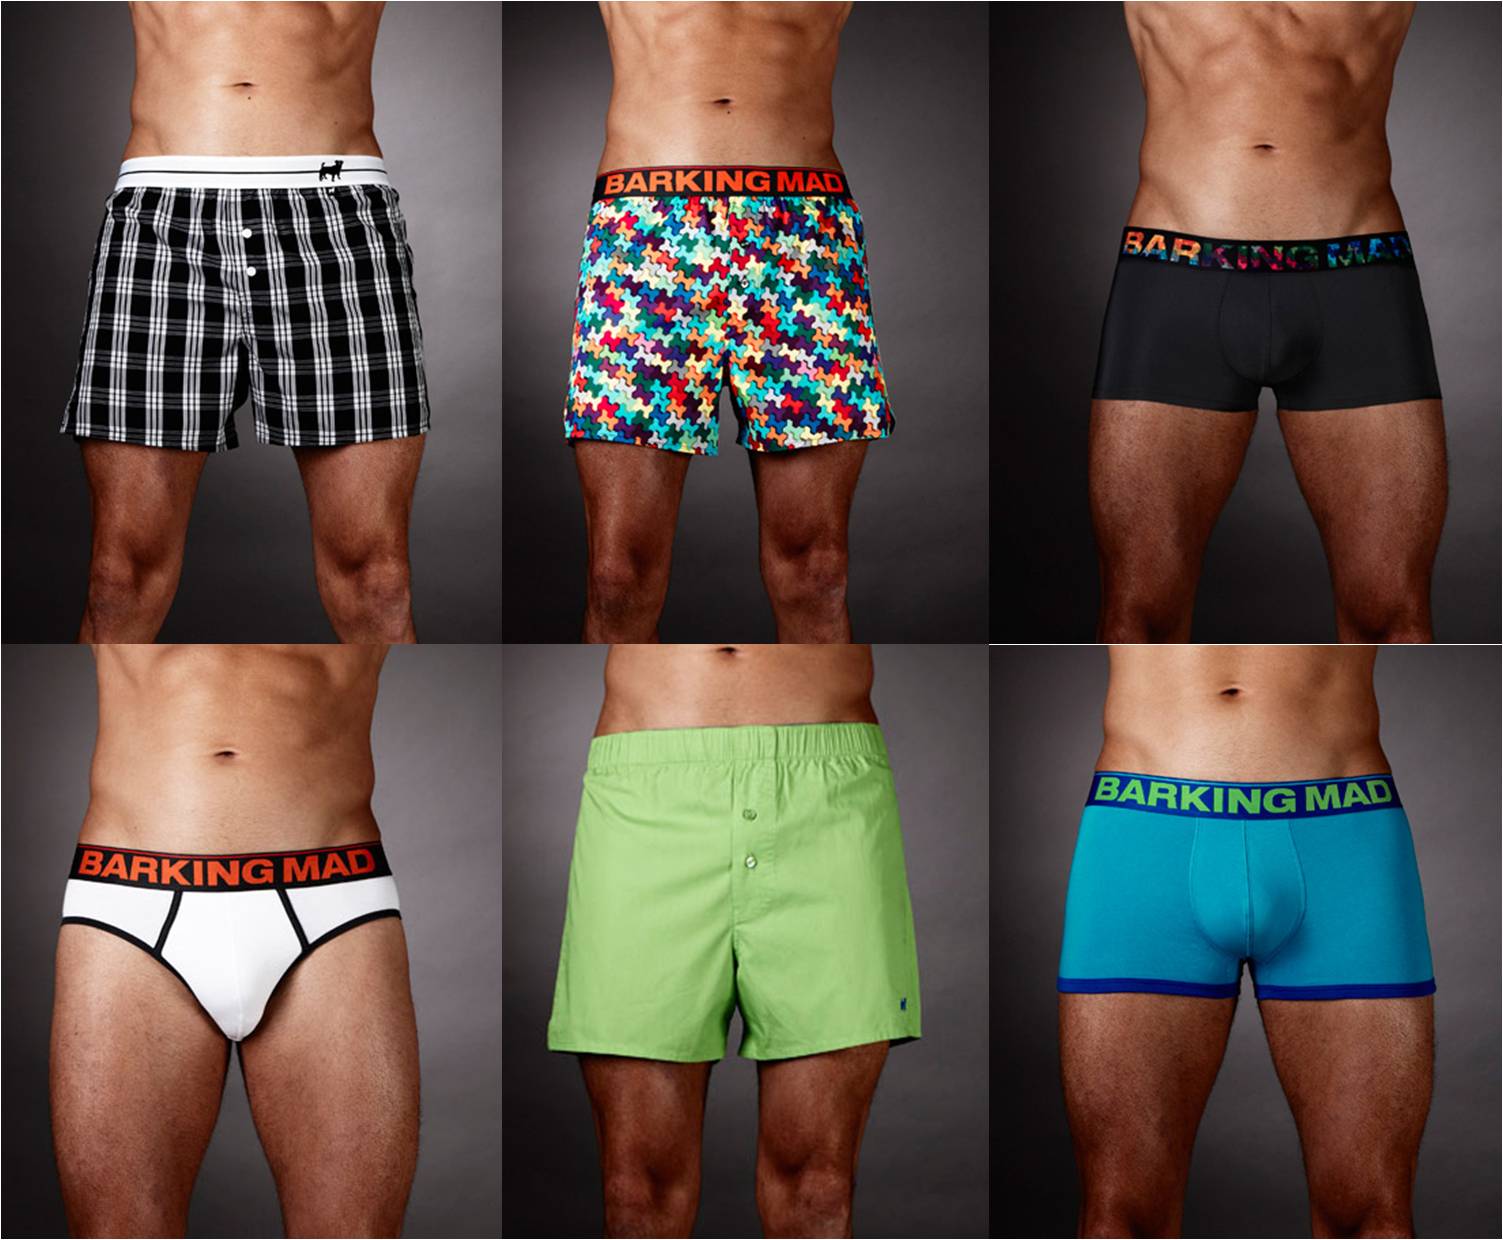 19 Facts About Underwear - Gallery